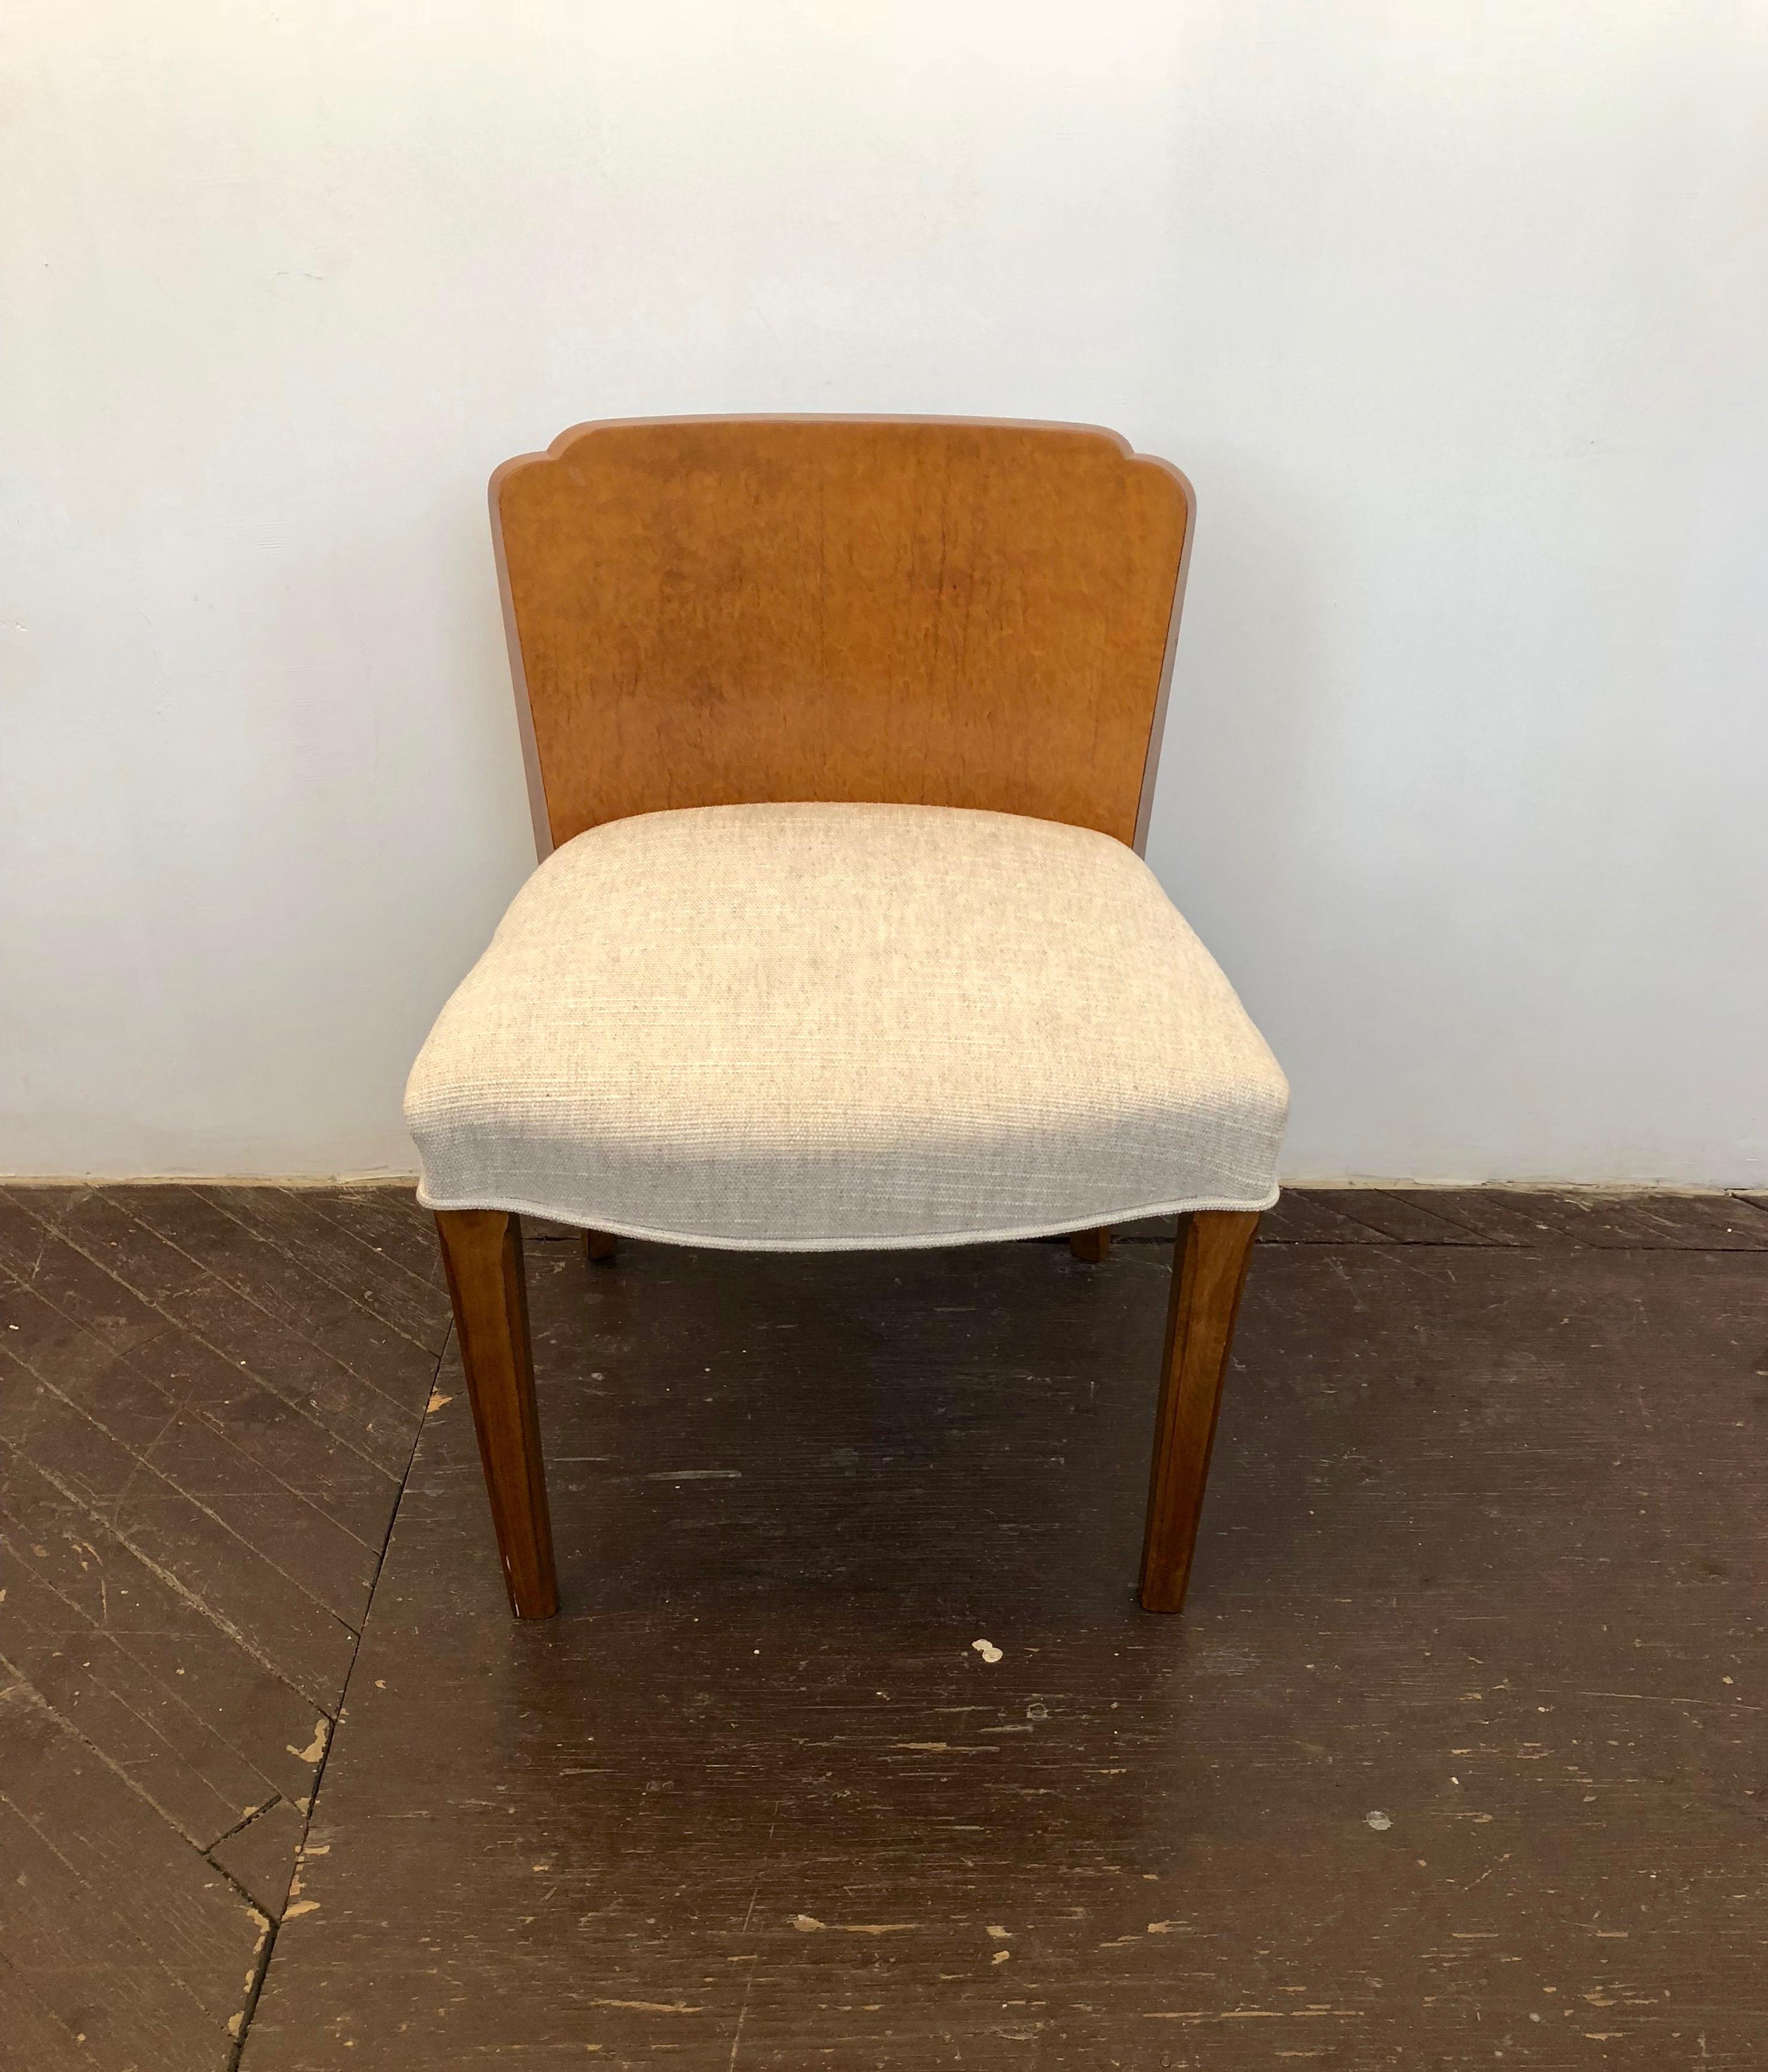 Restored American deco vanity chair has a burl wood back that has scalloped corners along the top, two wooden, arched, back legs and two wooden front legs that have a vertical carved detail along the edges, and a reupholstered curving seat in an